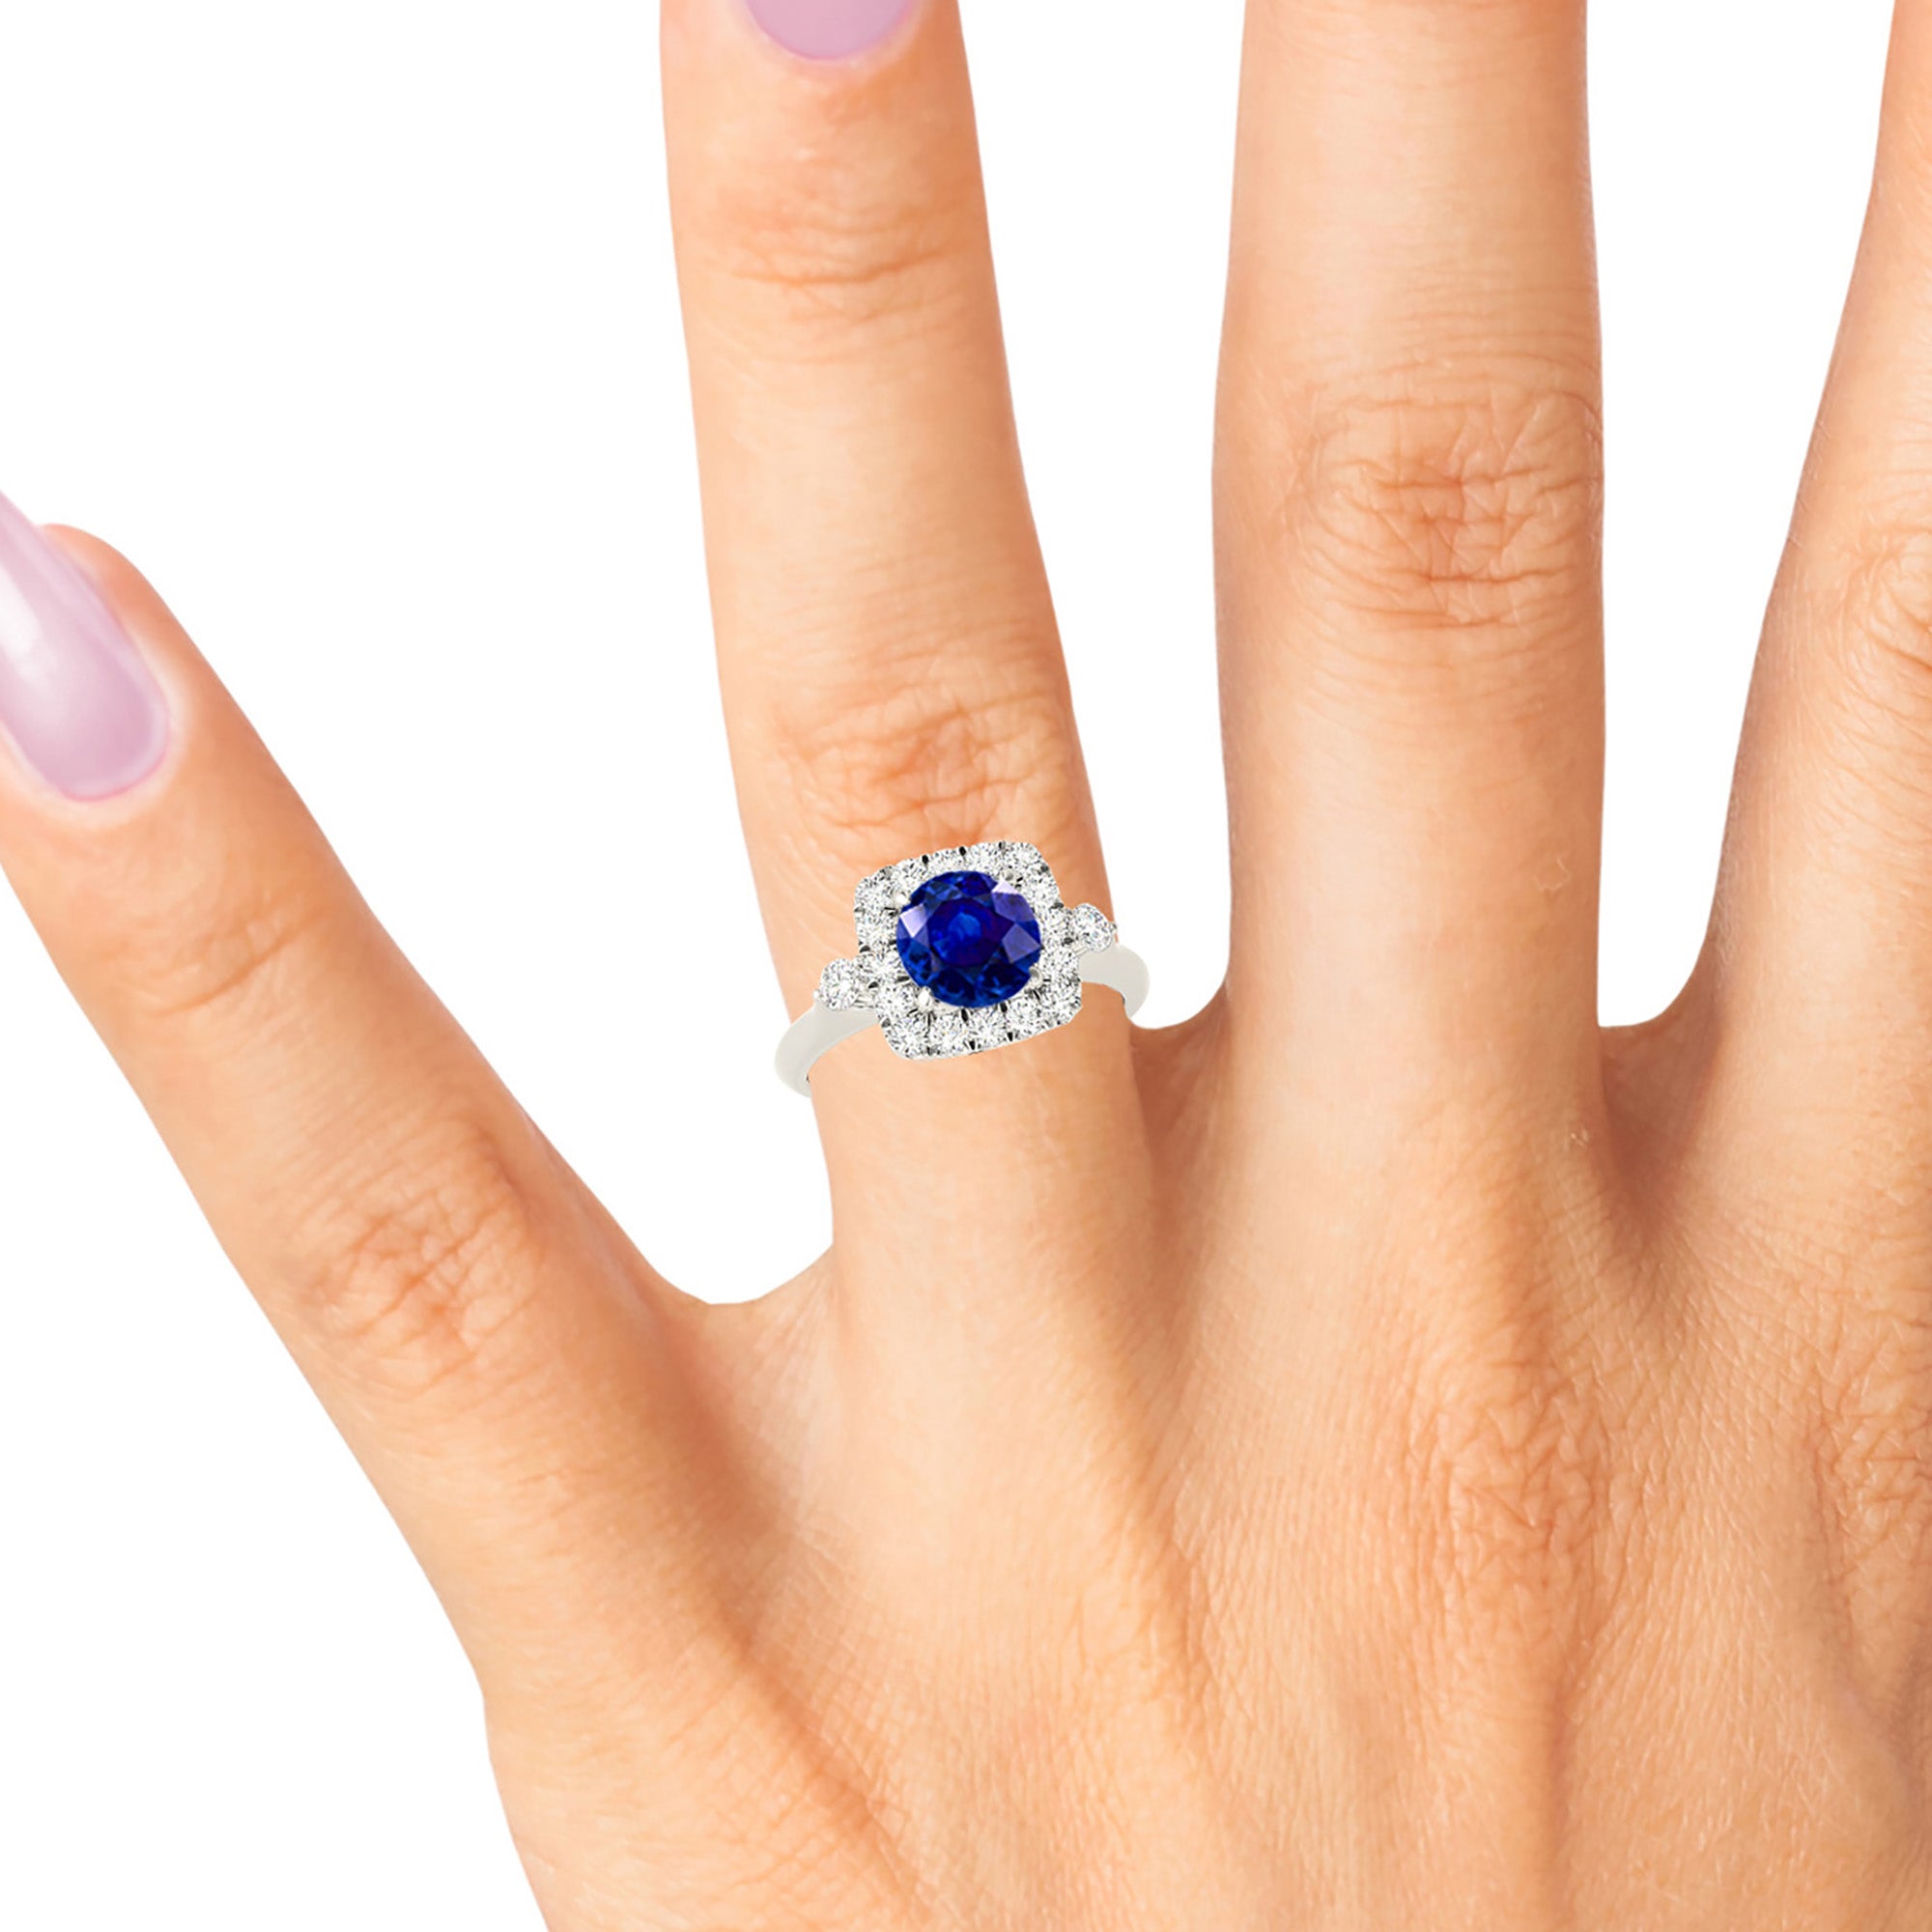 2.41 ct. Genuine Blue Round Sapphire Ring with 0.50 ctw. Diamond Cushion Halo, Side Accent Diamonds, Solid Band | Blue Sapphire Classic Ring-in 14K/18K White, Yellow, Rose Gold and Platinum - Christmas Jewelry Gift -VIRABYANI